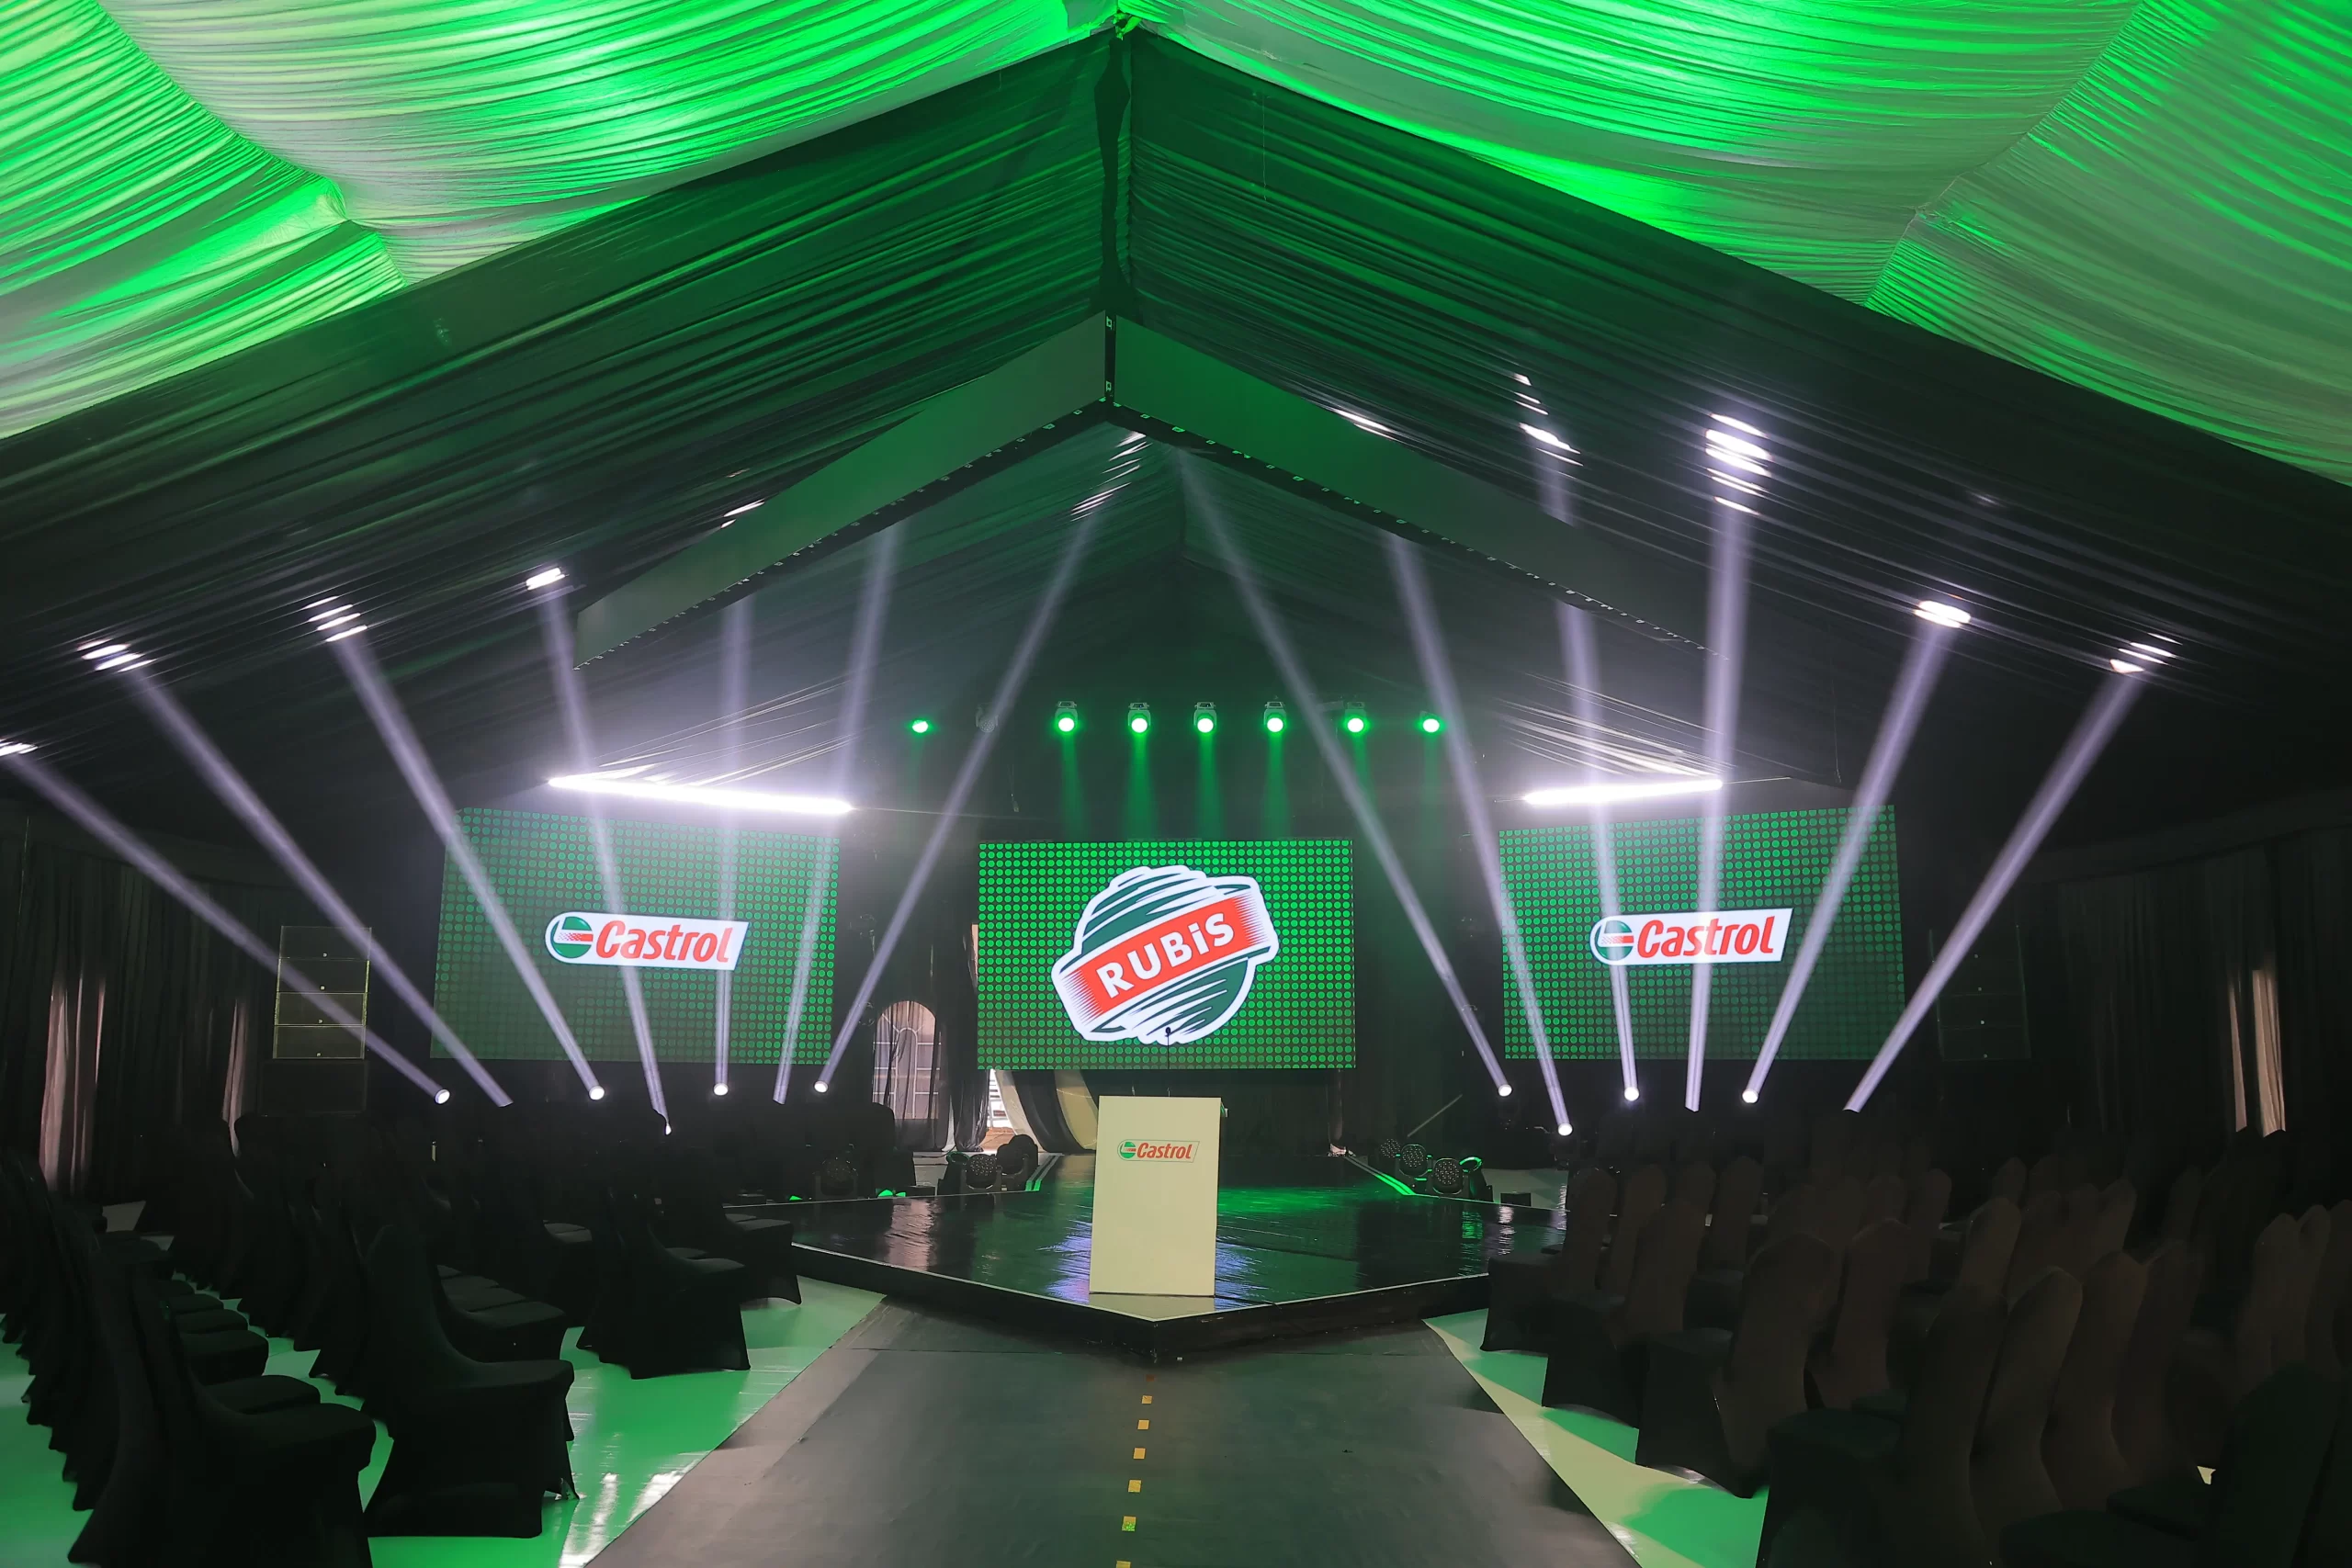 CASTROL AND RUBIS ENERGY PARTNER TO LAUNCH A WIDE RANGE OF CASTROL OIL LUBRICANTS IN UGANDA